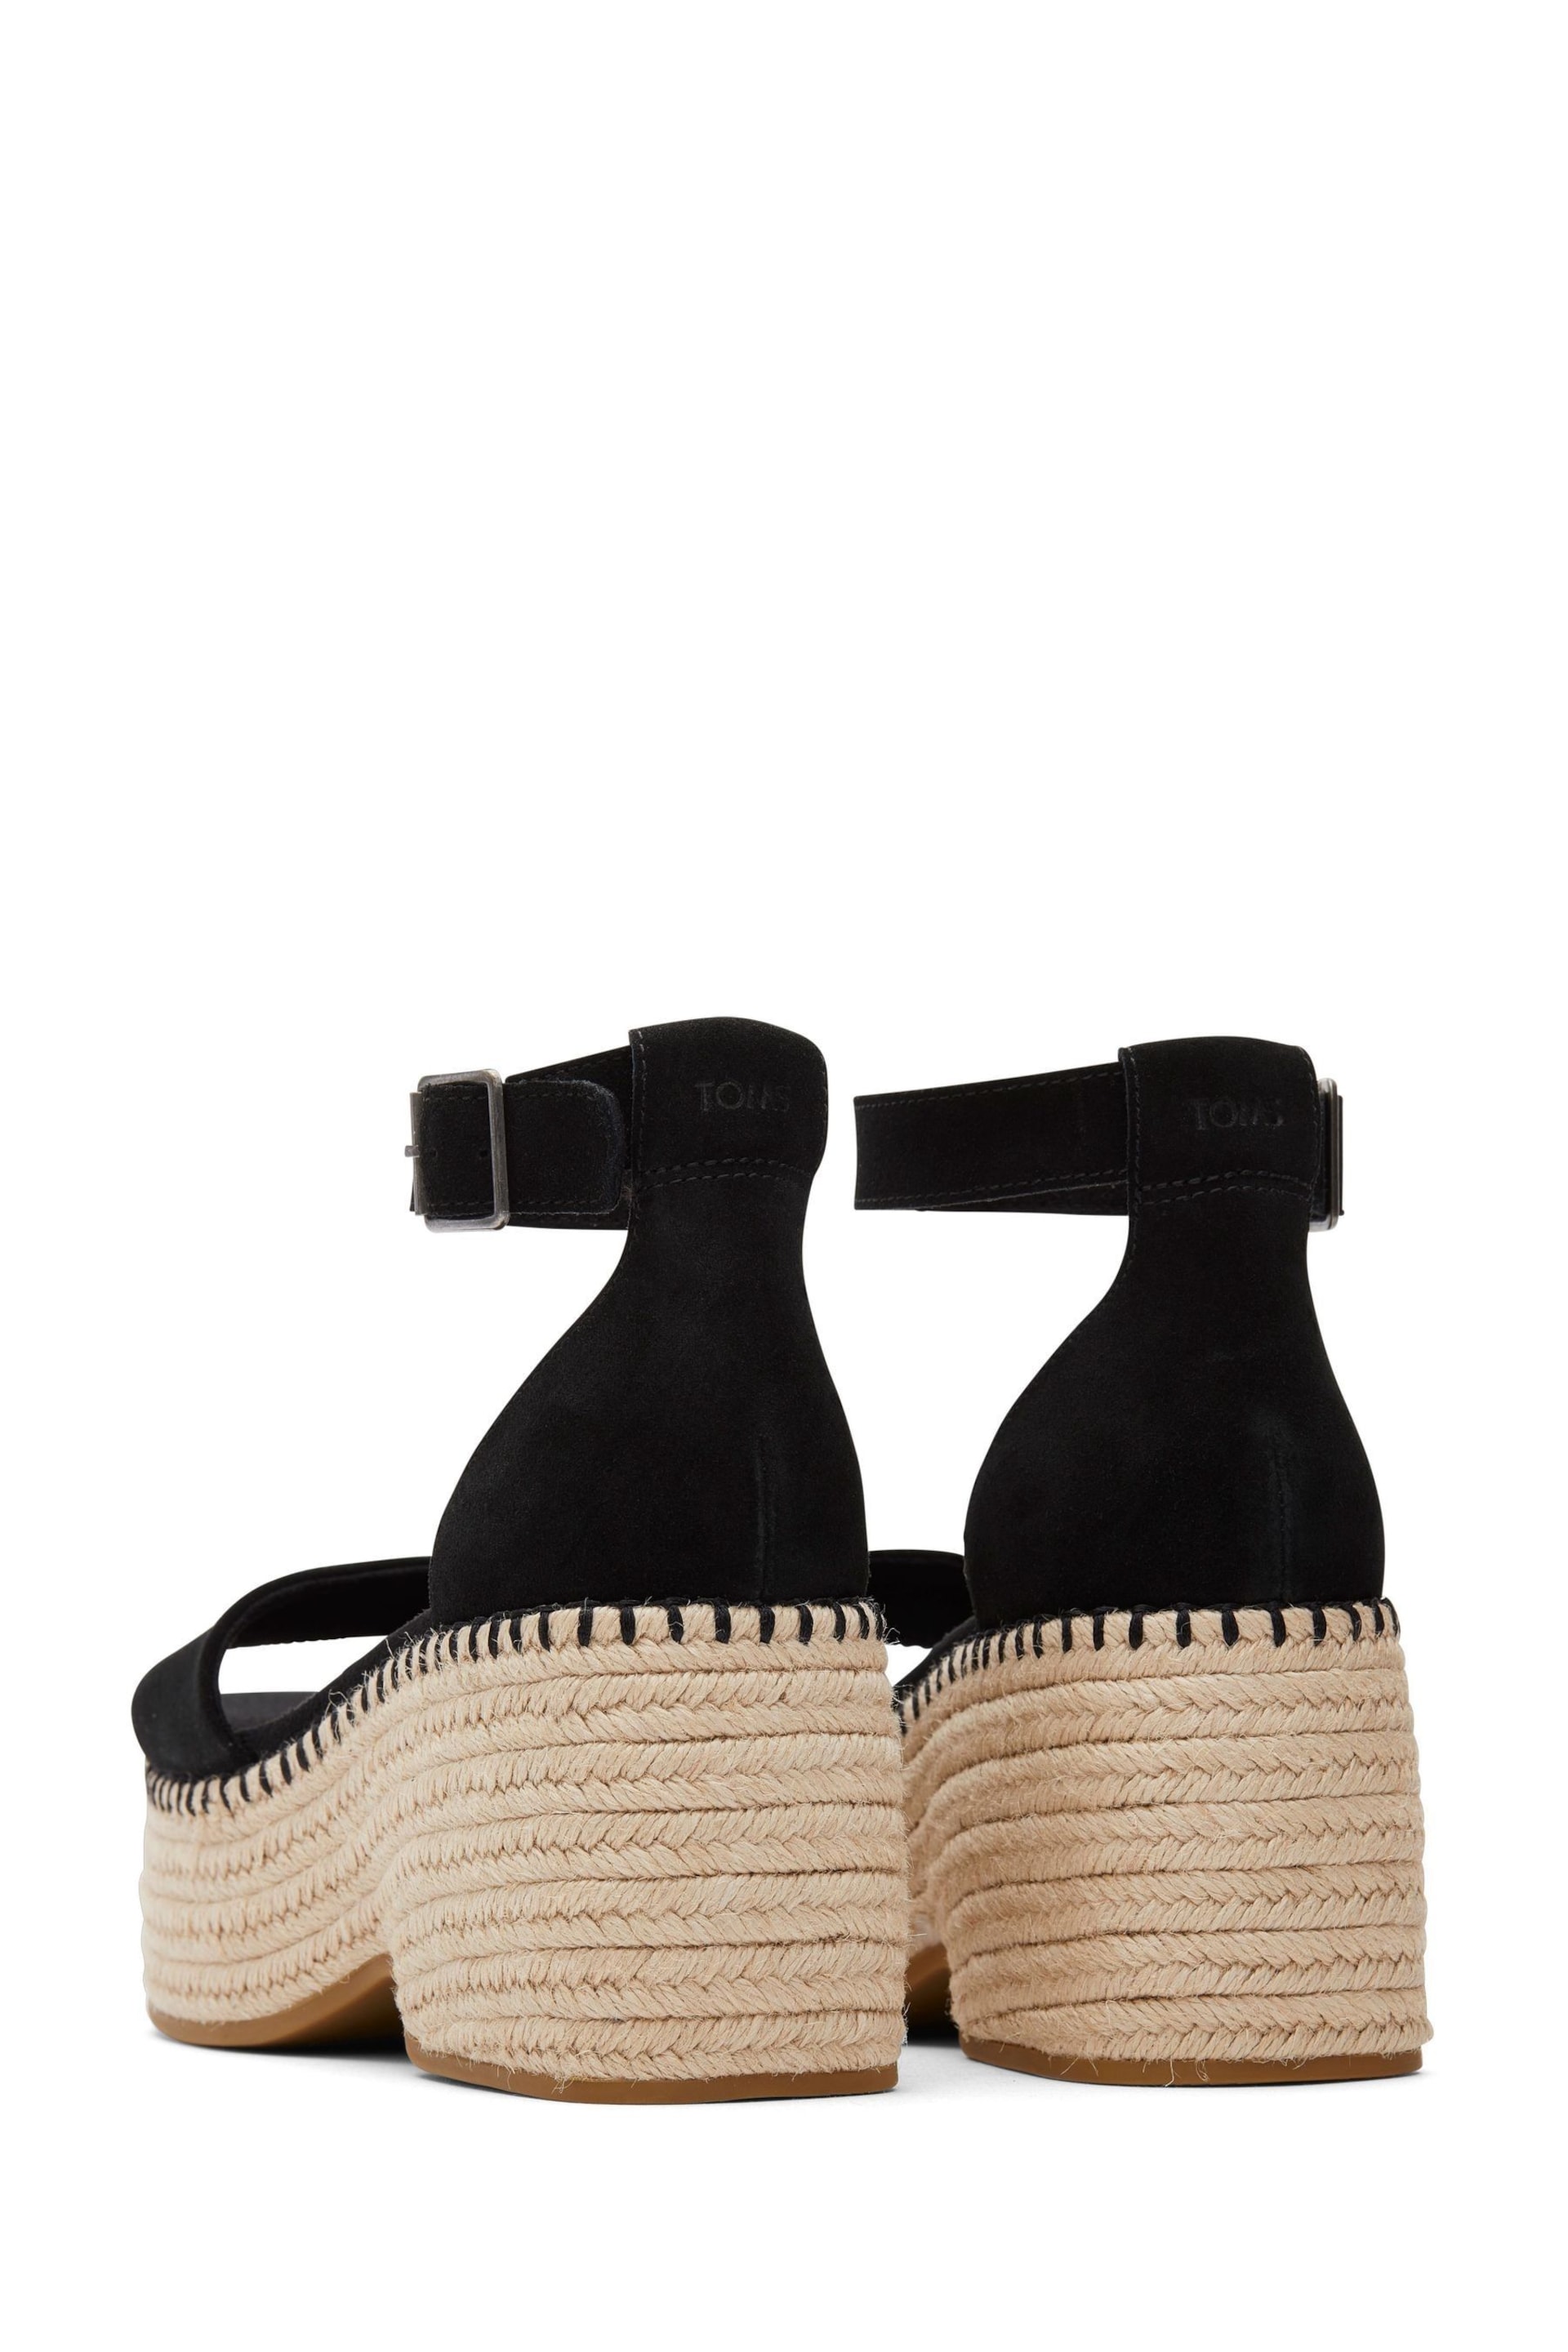 Toms Laila Black Sandals In Suede - Image 3 of 5